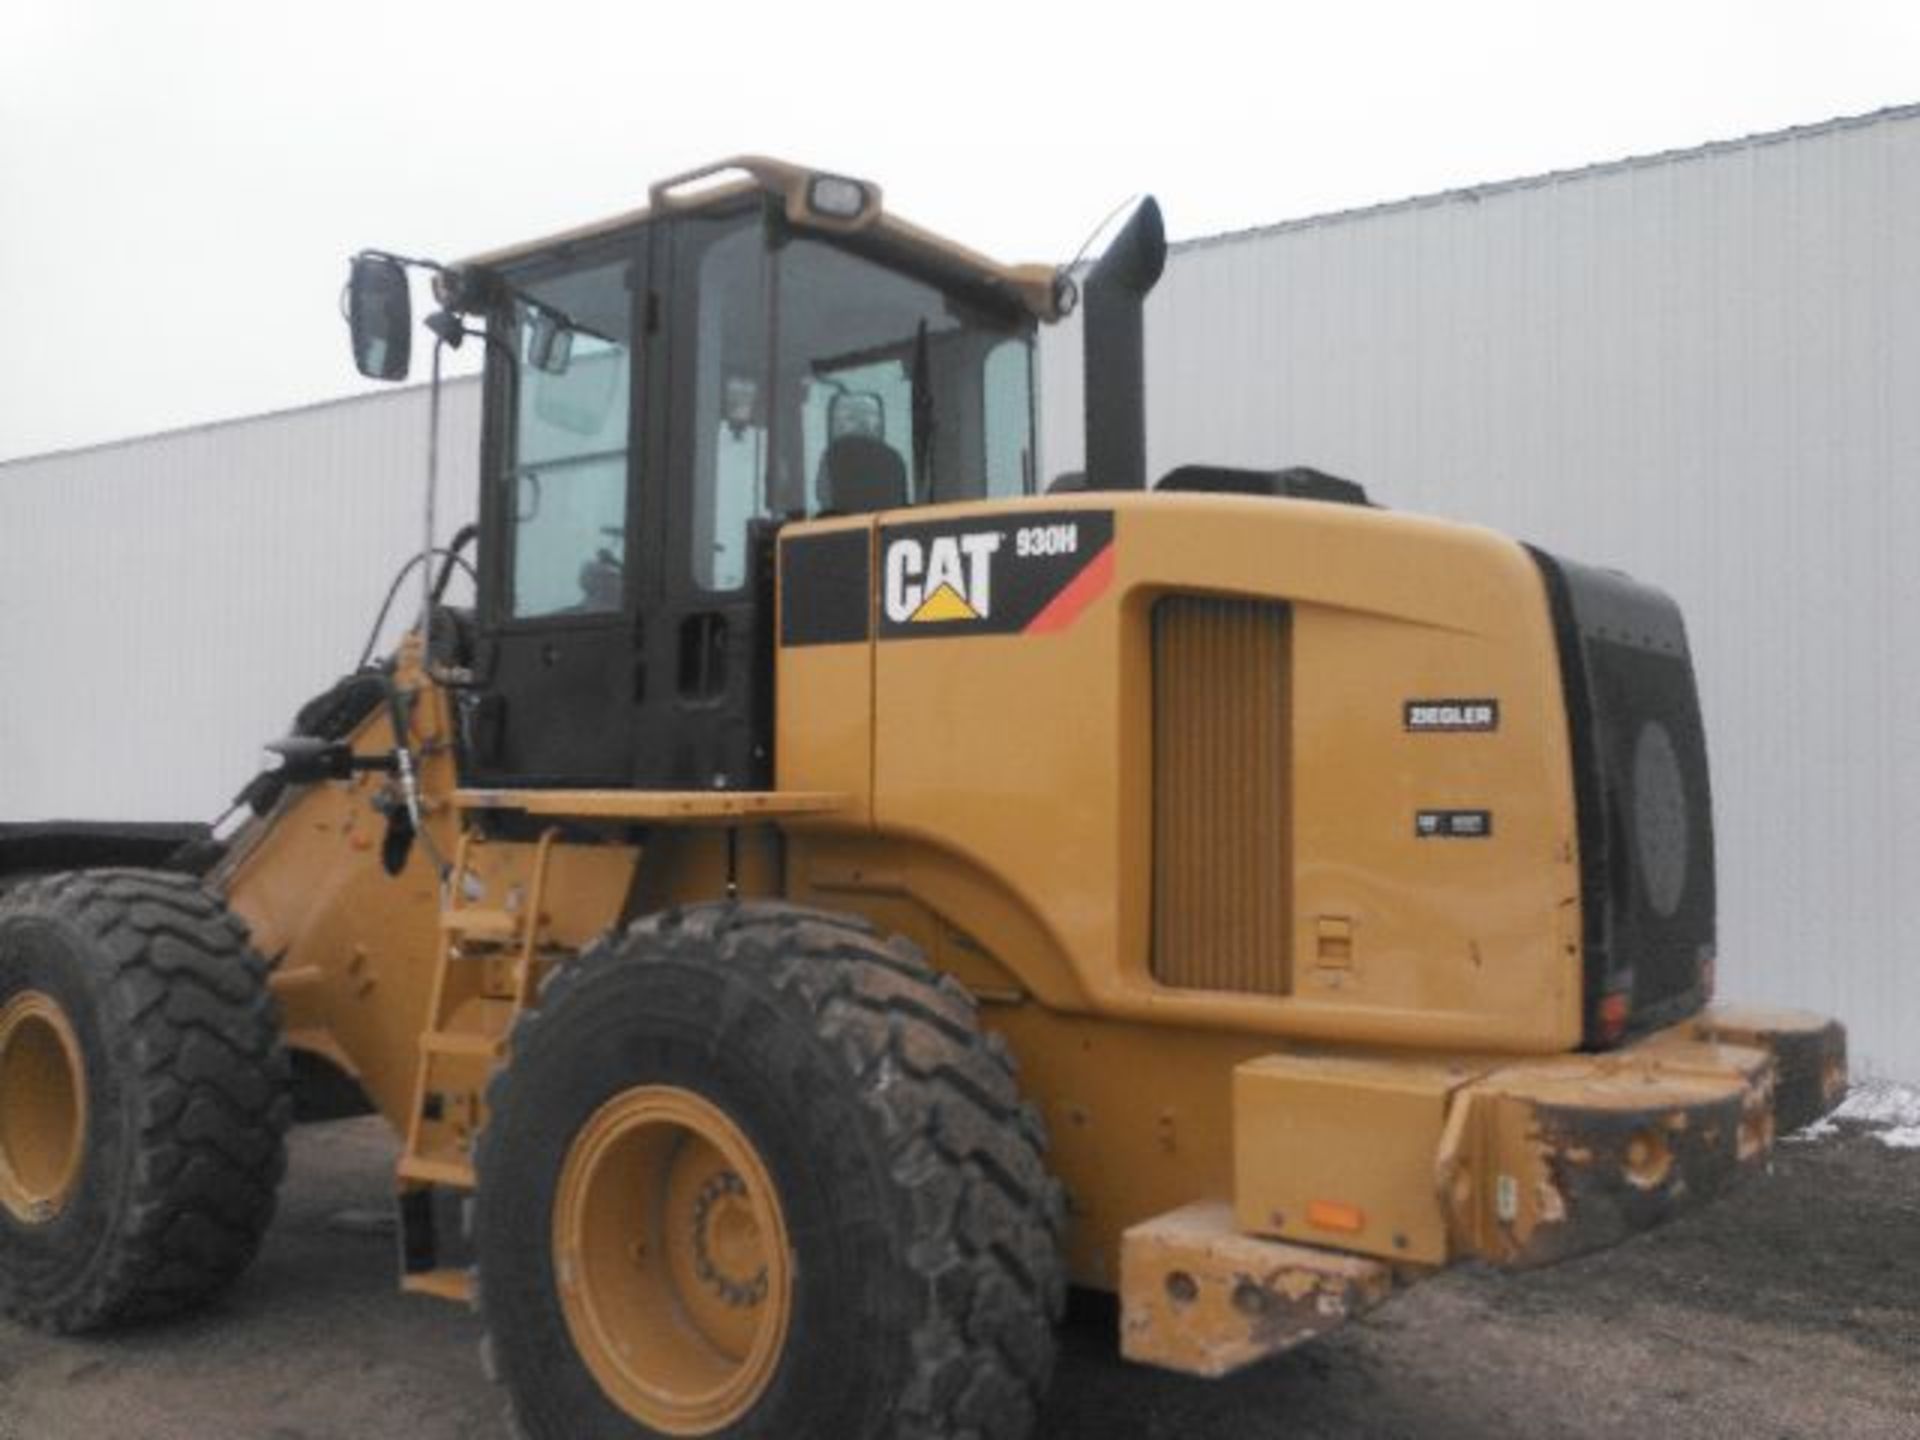 2008 Caterpillar 930H S/N CAT0930HHDHC00280, high lift,  ride control, 8,450 hrs. on meter, 9.300 - Image 6 of 14